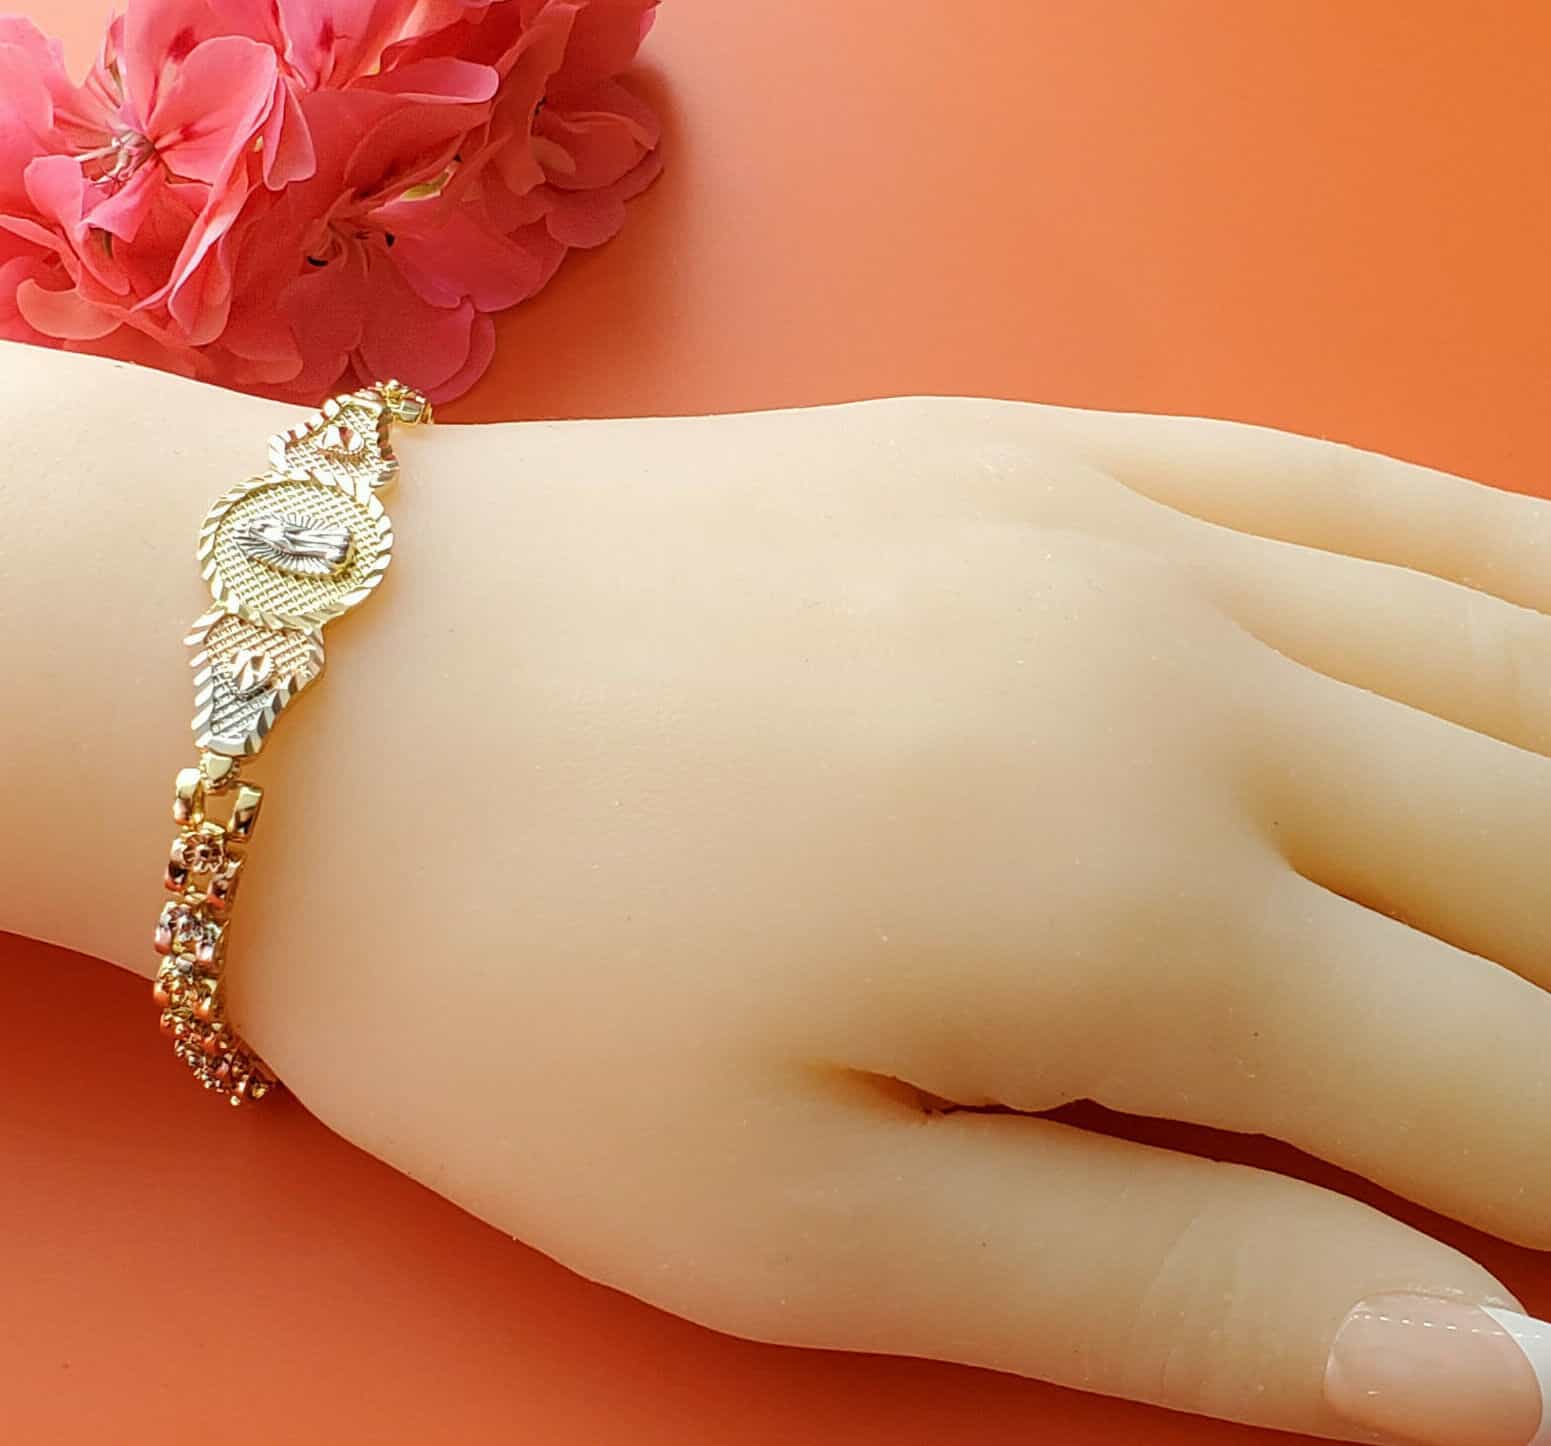 A woman’s hand with a gold bracelet on it.